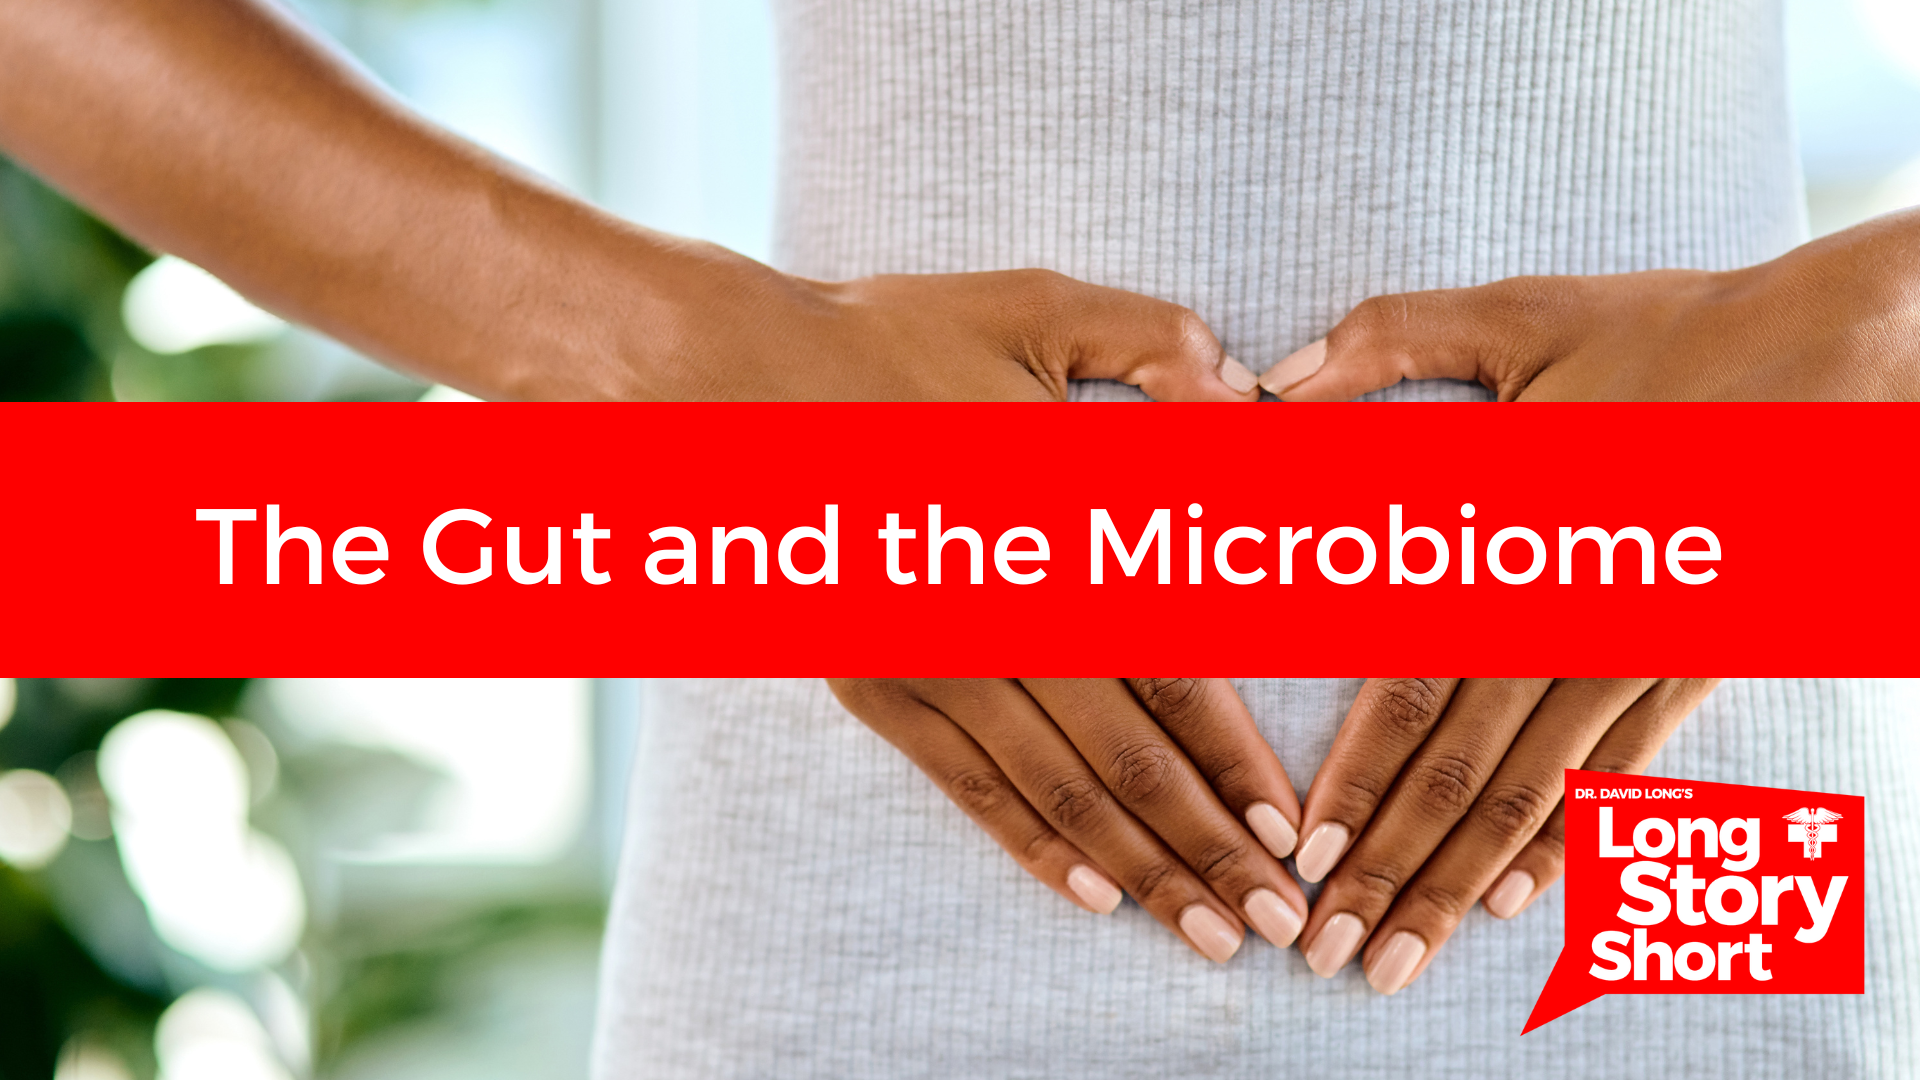 You are currently viewing The Gut and the Microbiome – Dr. David Long